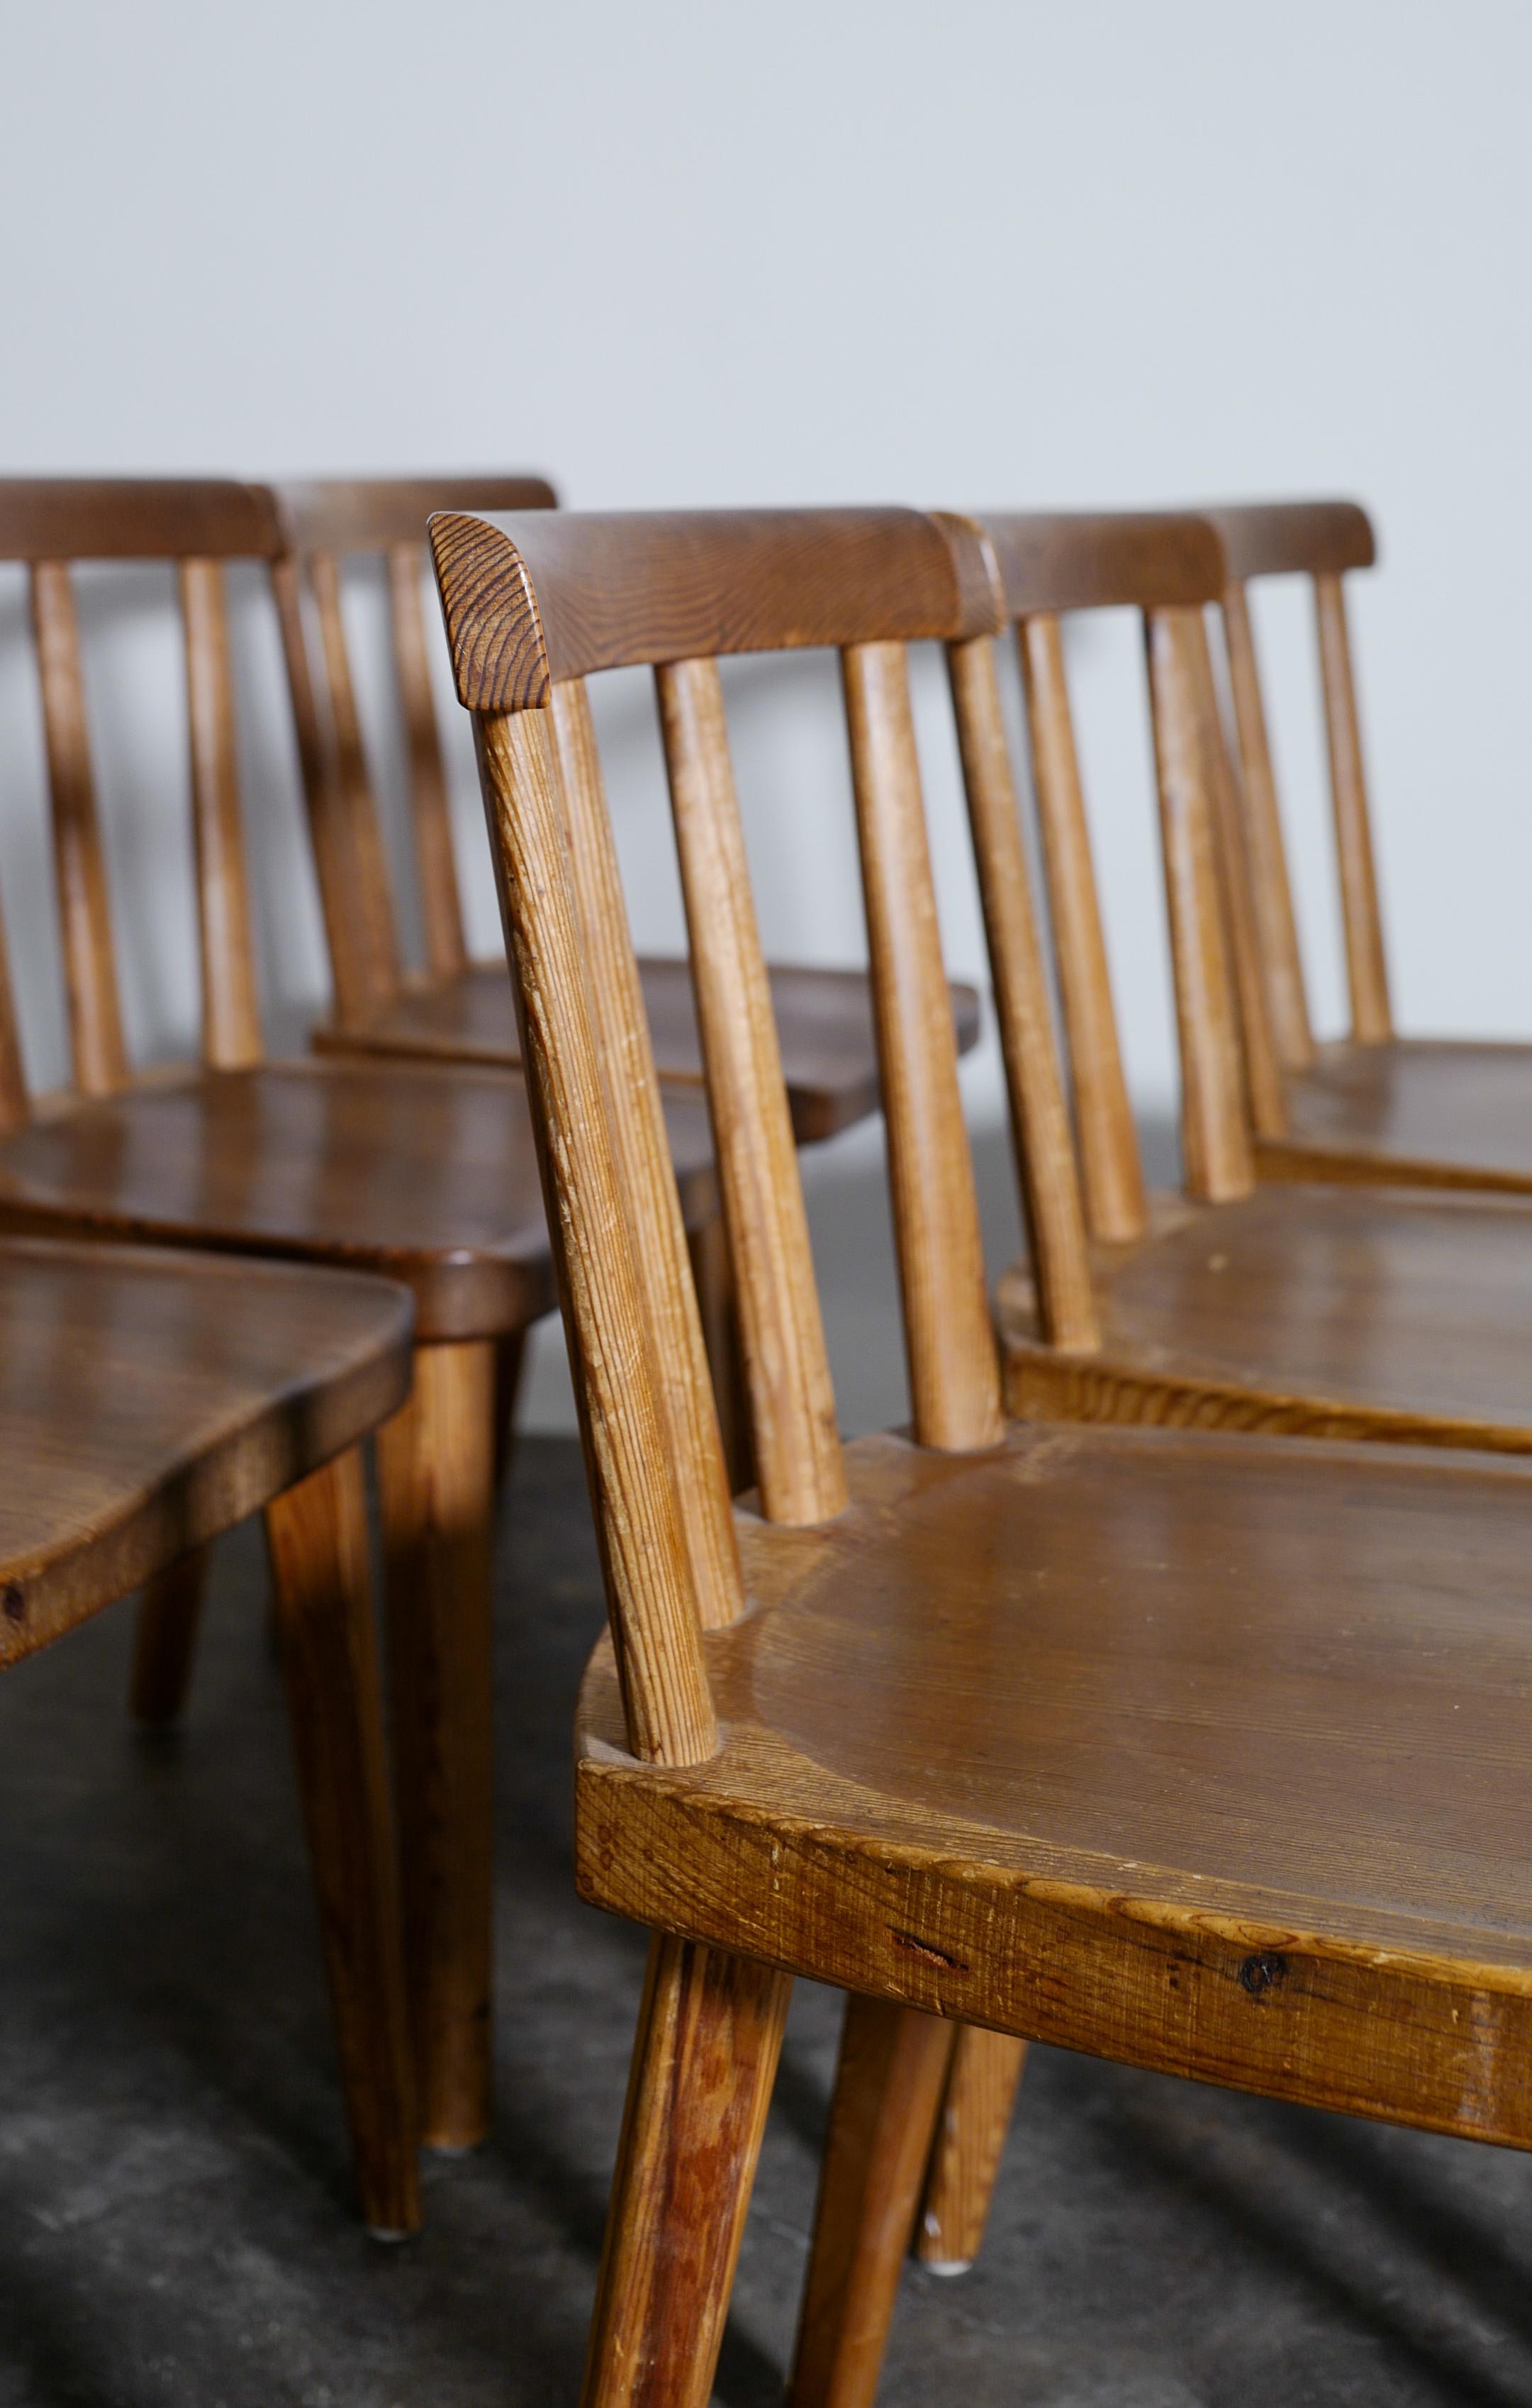 Stained Set of Six Utö Chairs by Axel Einar Hjorth in Pine for Nordiska Kompaniet, 1930s